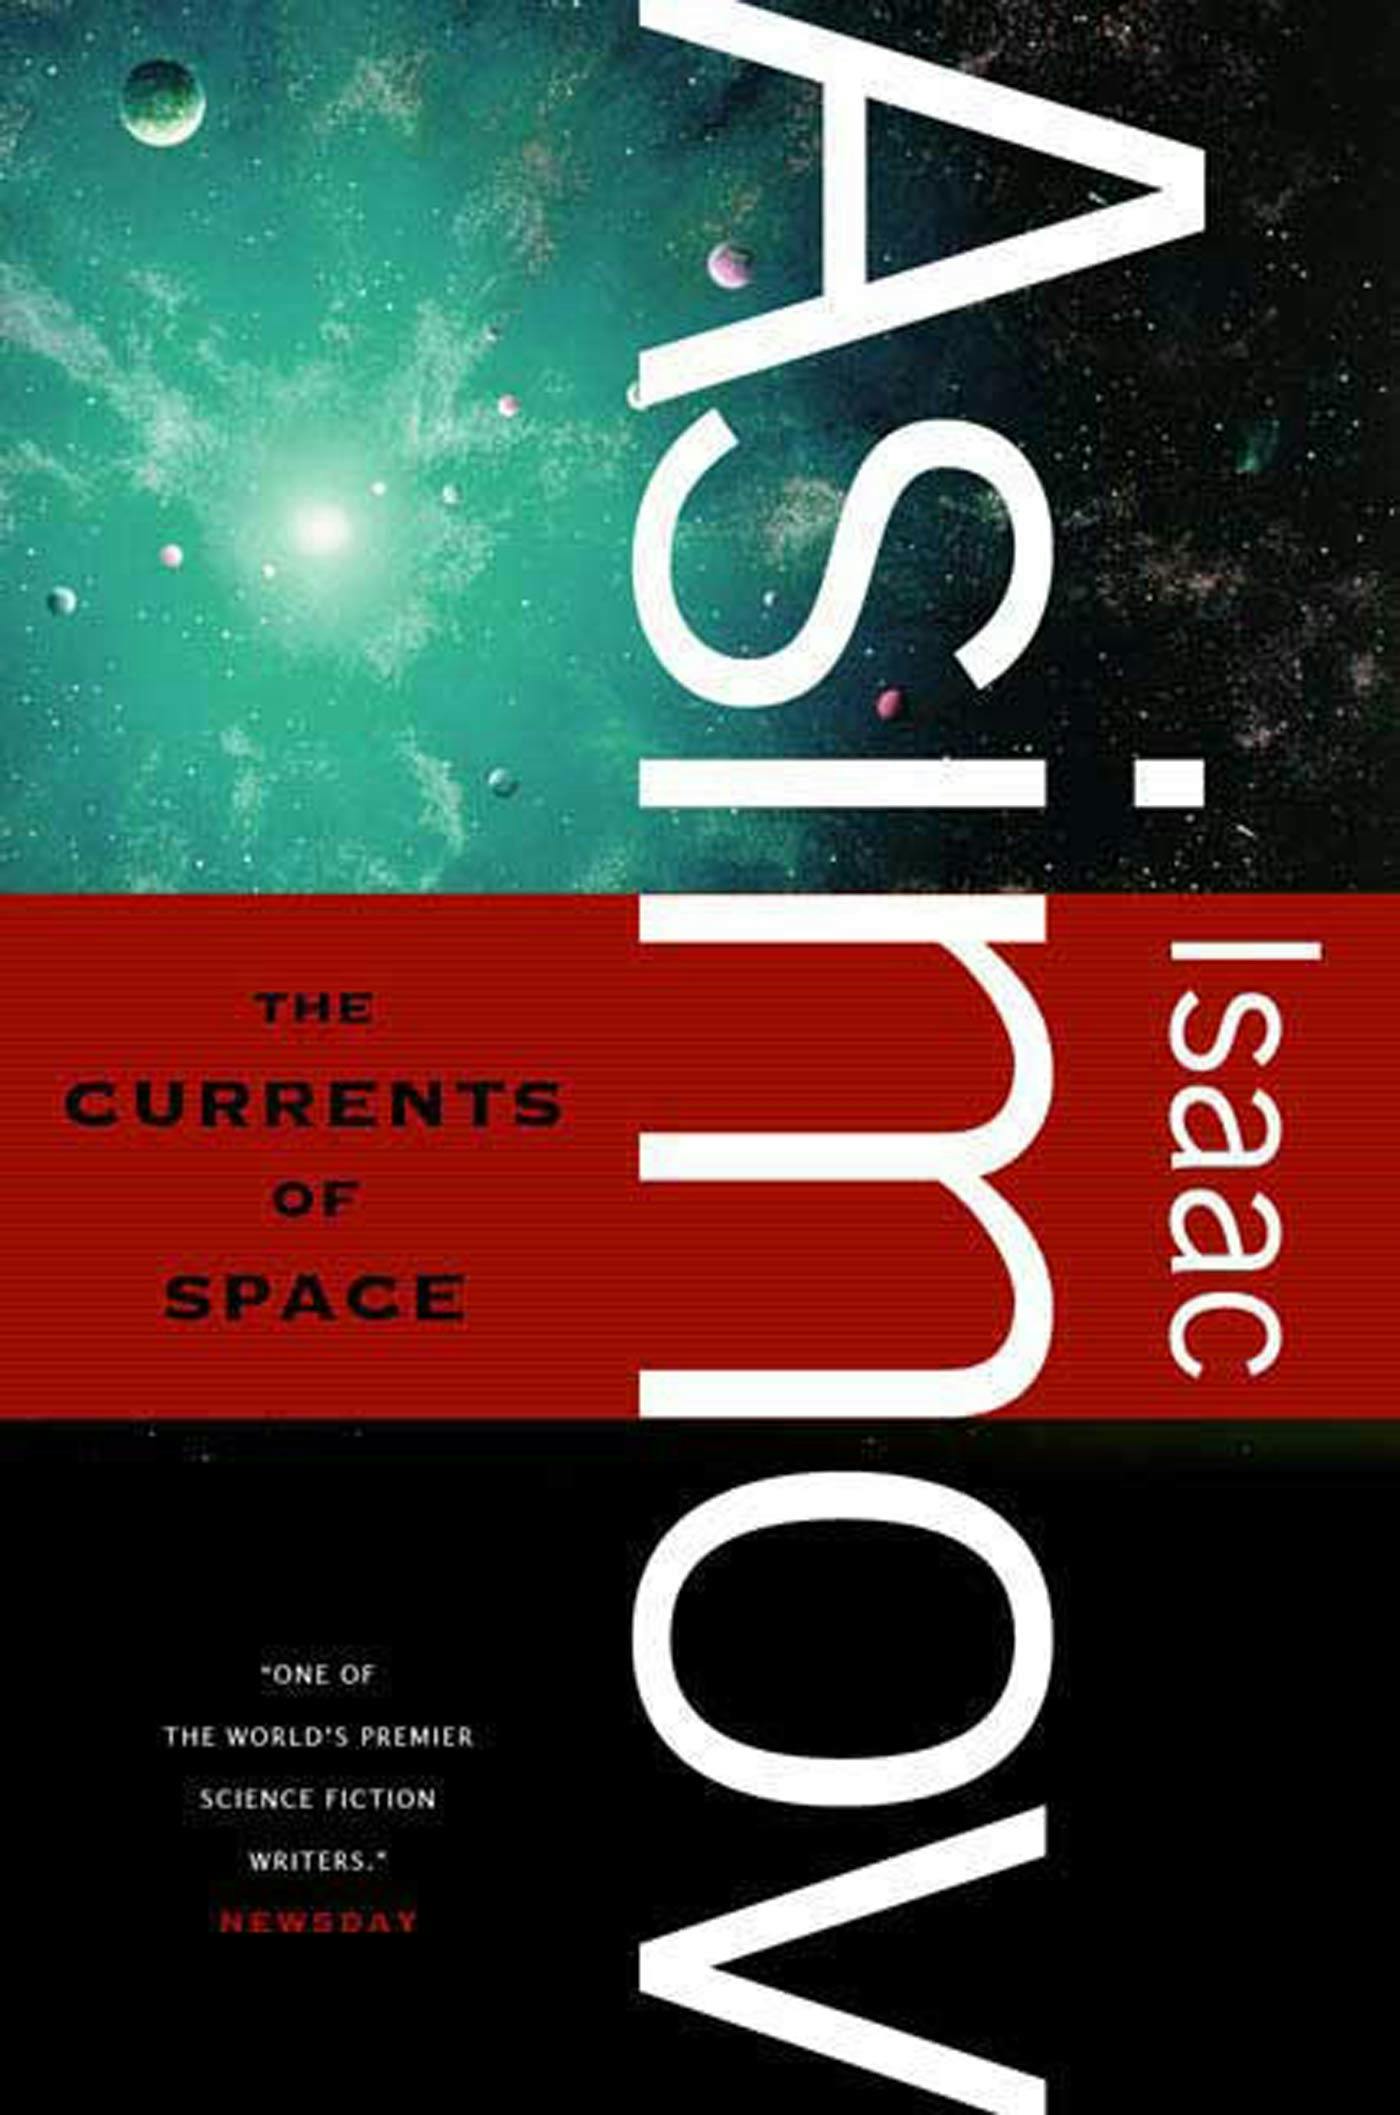 Cover for the book titled as: The Currents of Space